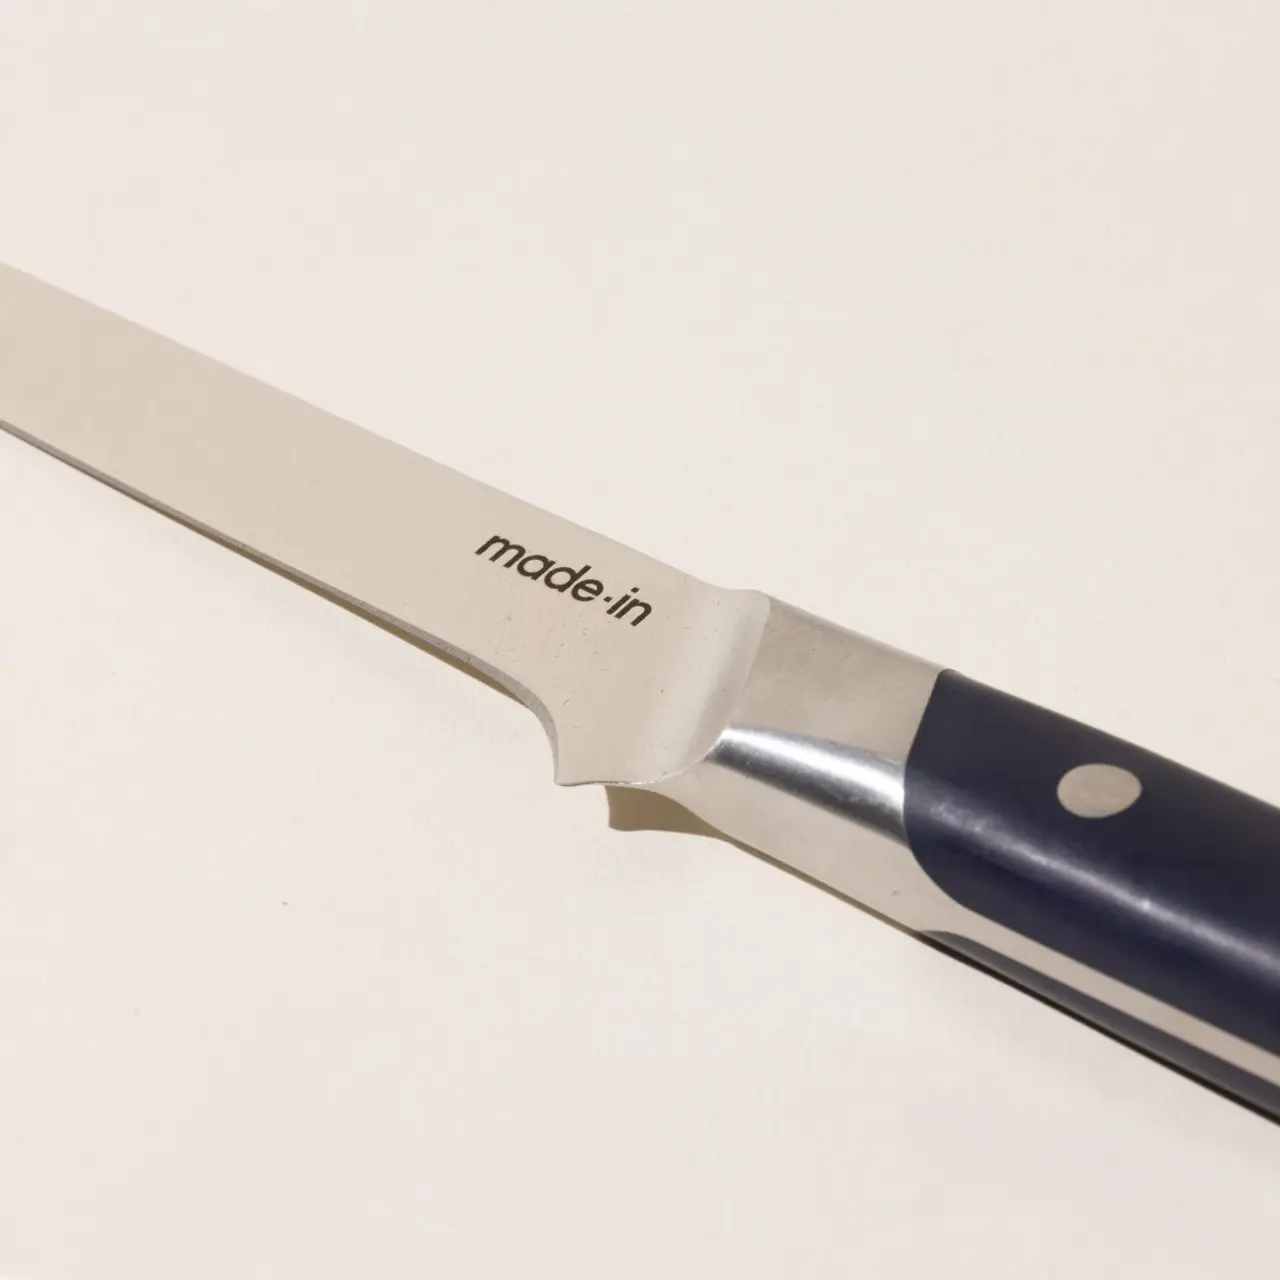 A close-up of a kitchen knife with the text "made-in" on the blade against a plain background.